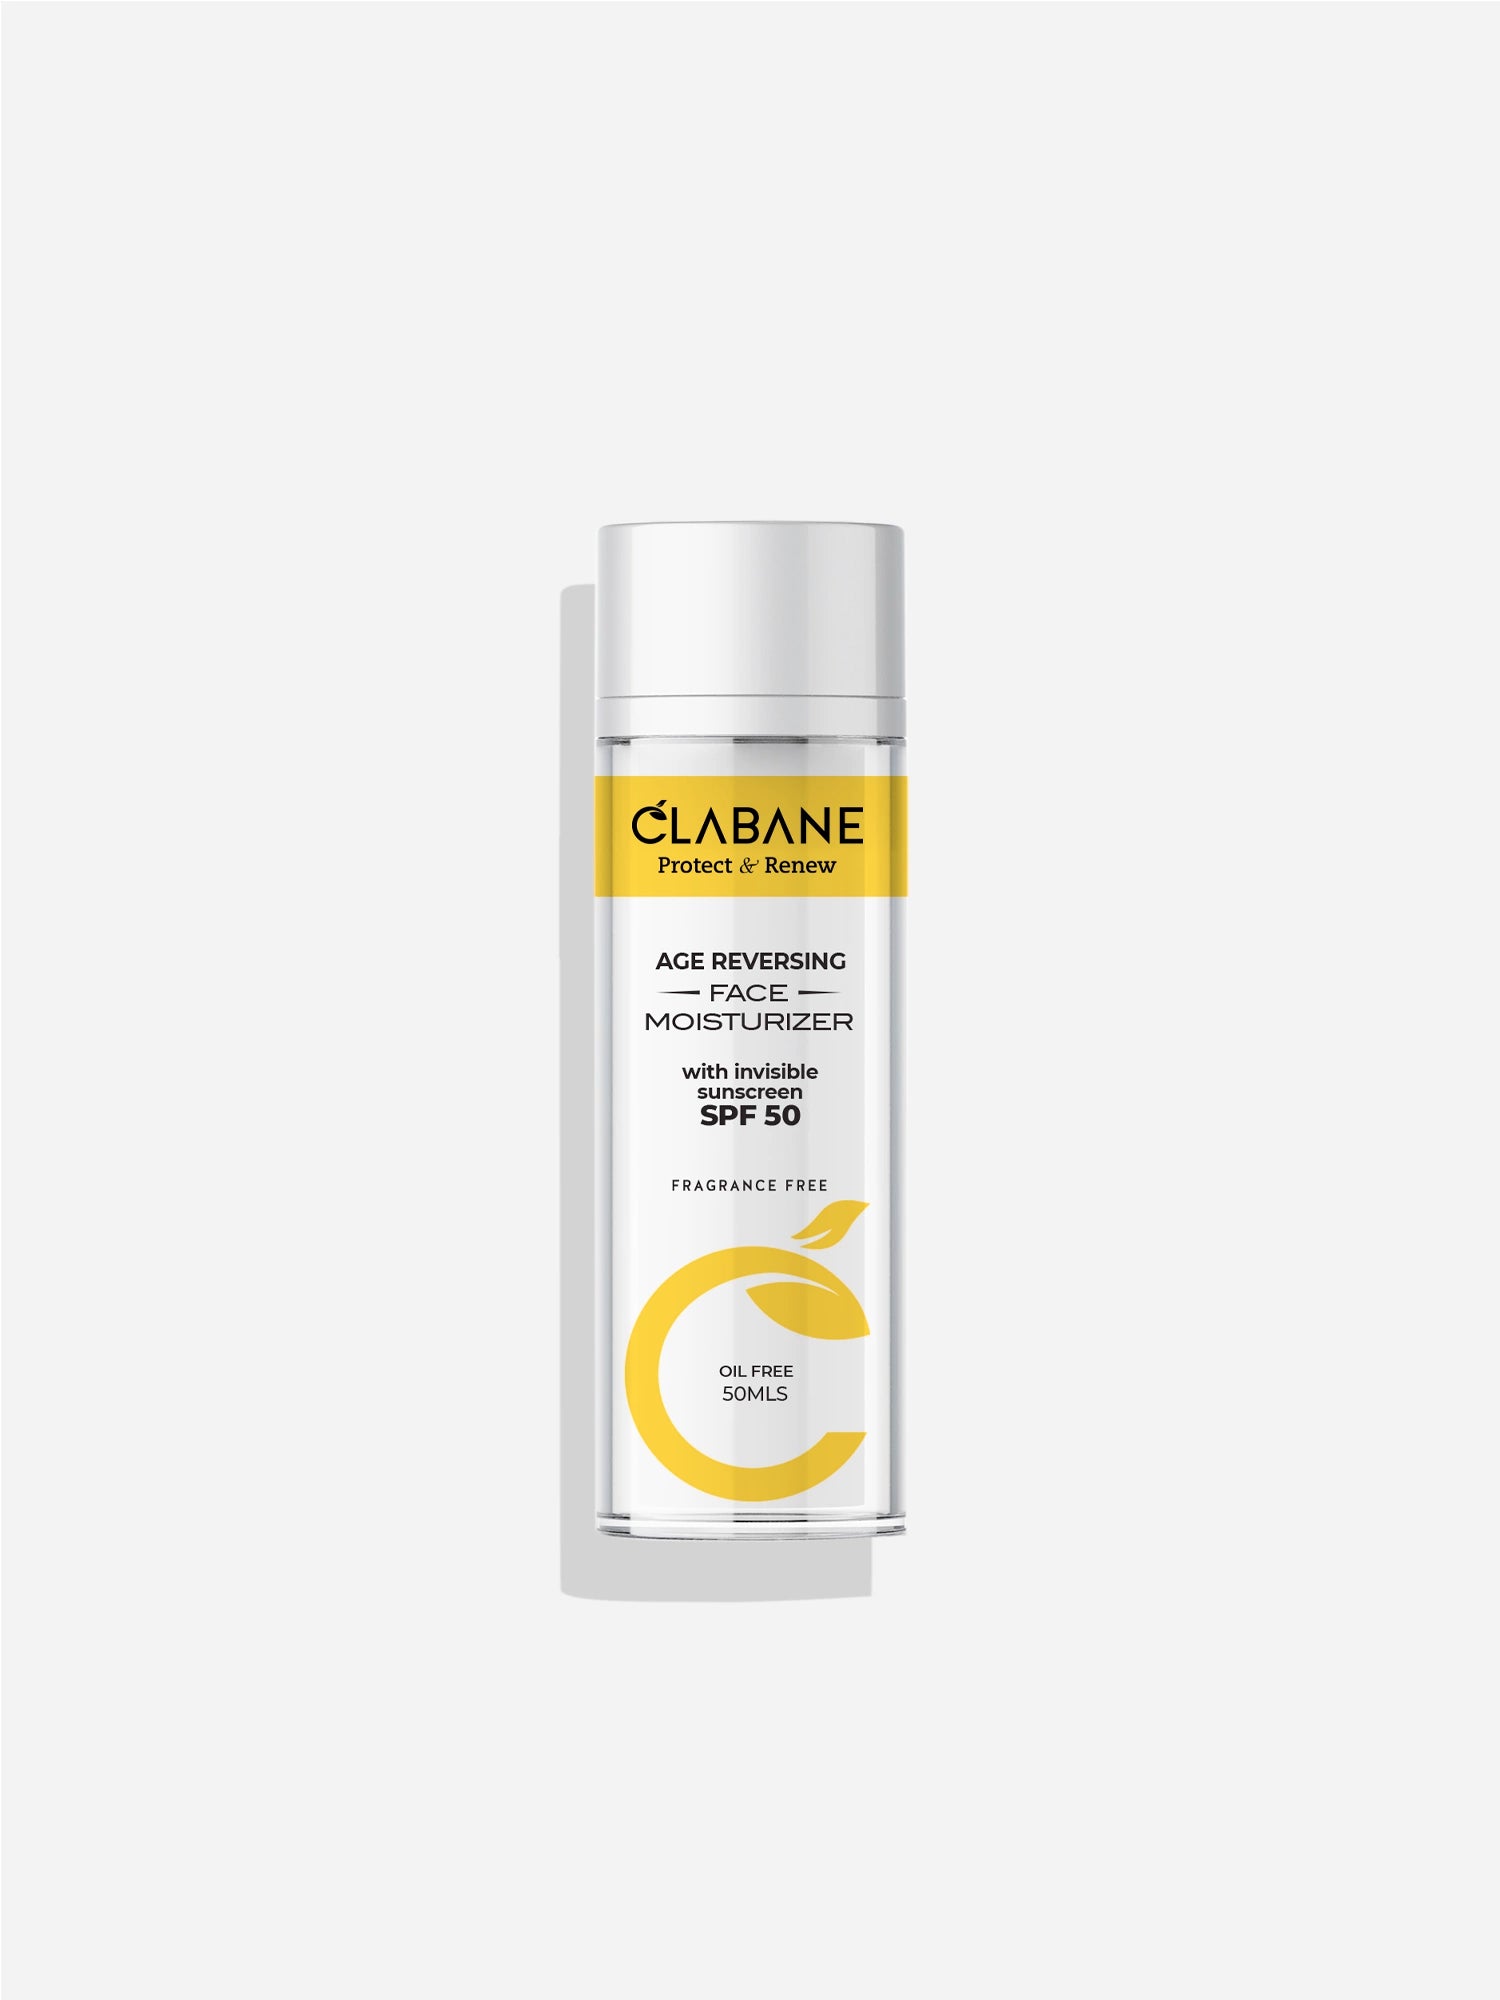 Clabane Protect and Renew Age Reversing Face Moisturiser with Invisible Sunscreen SPF 50